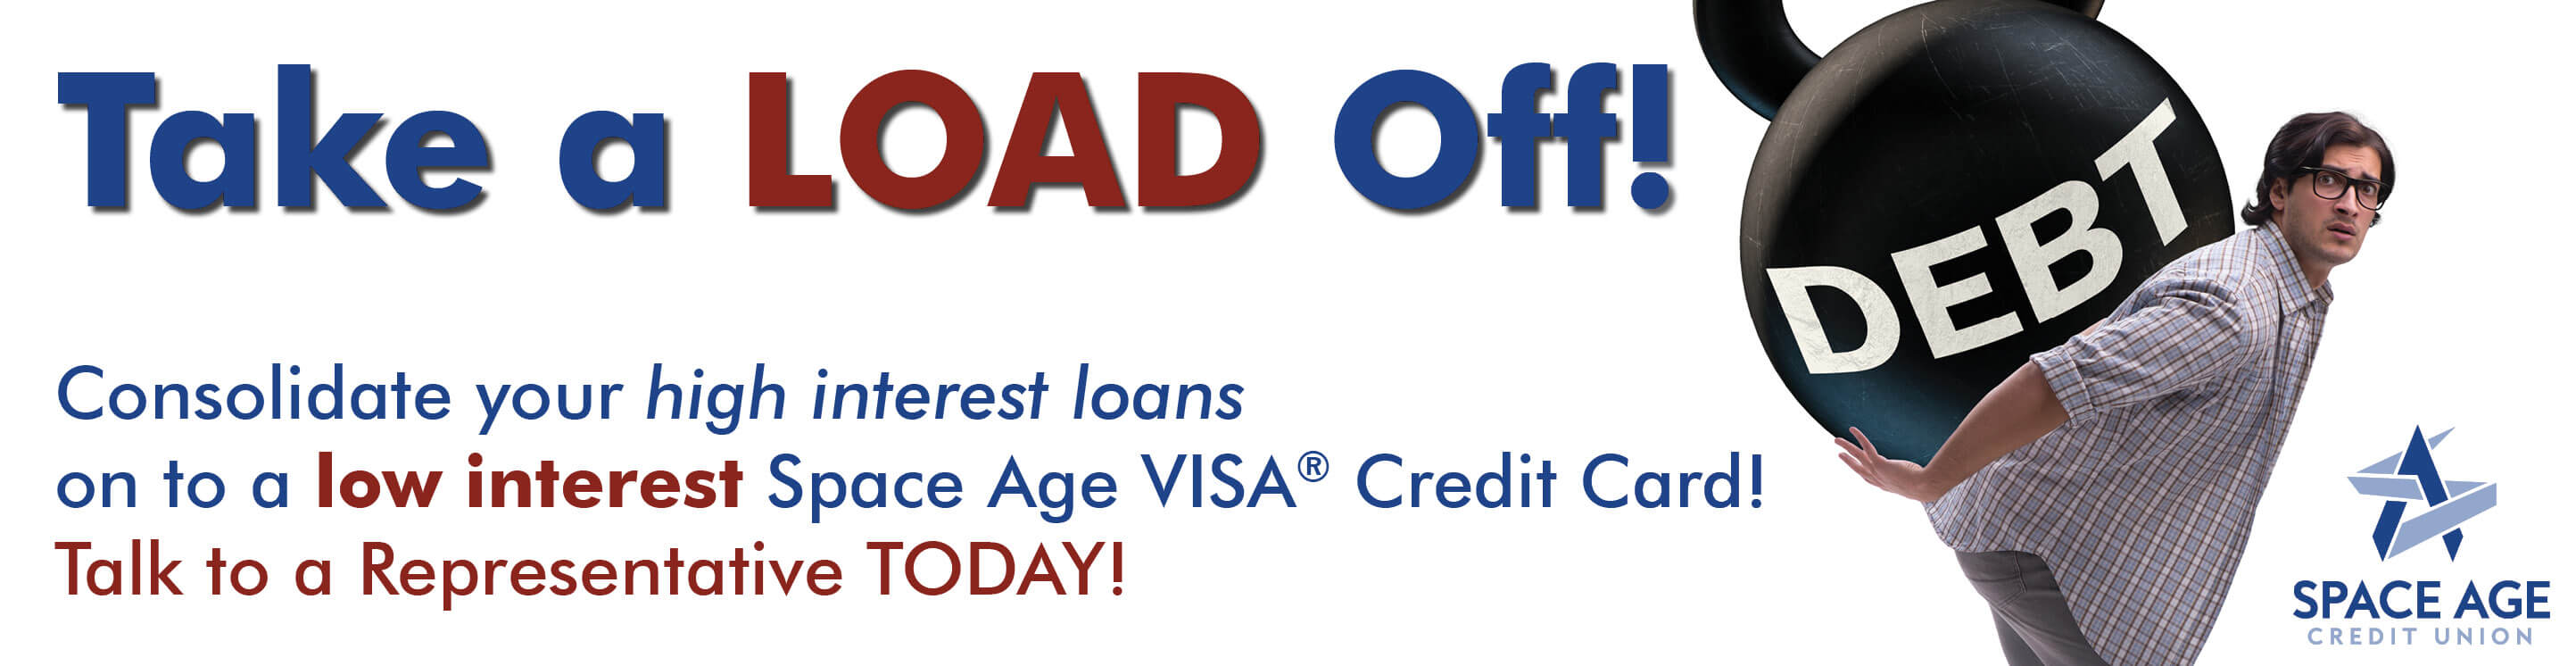 Consolidate your high interest loans on to a low interest  Space Age VISAÃƒâ€šÃ‚Â® Credit Card! Talk to a Representative TODAY!